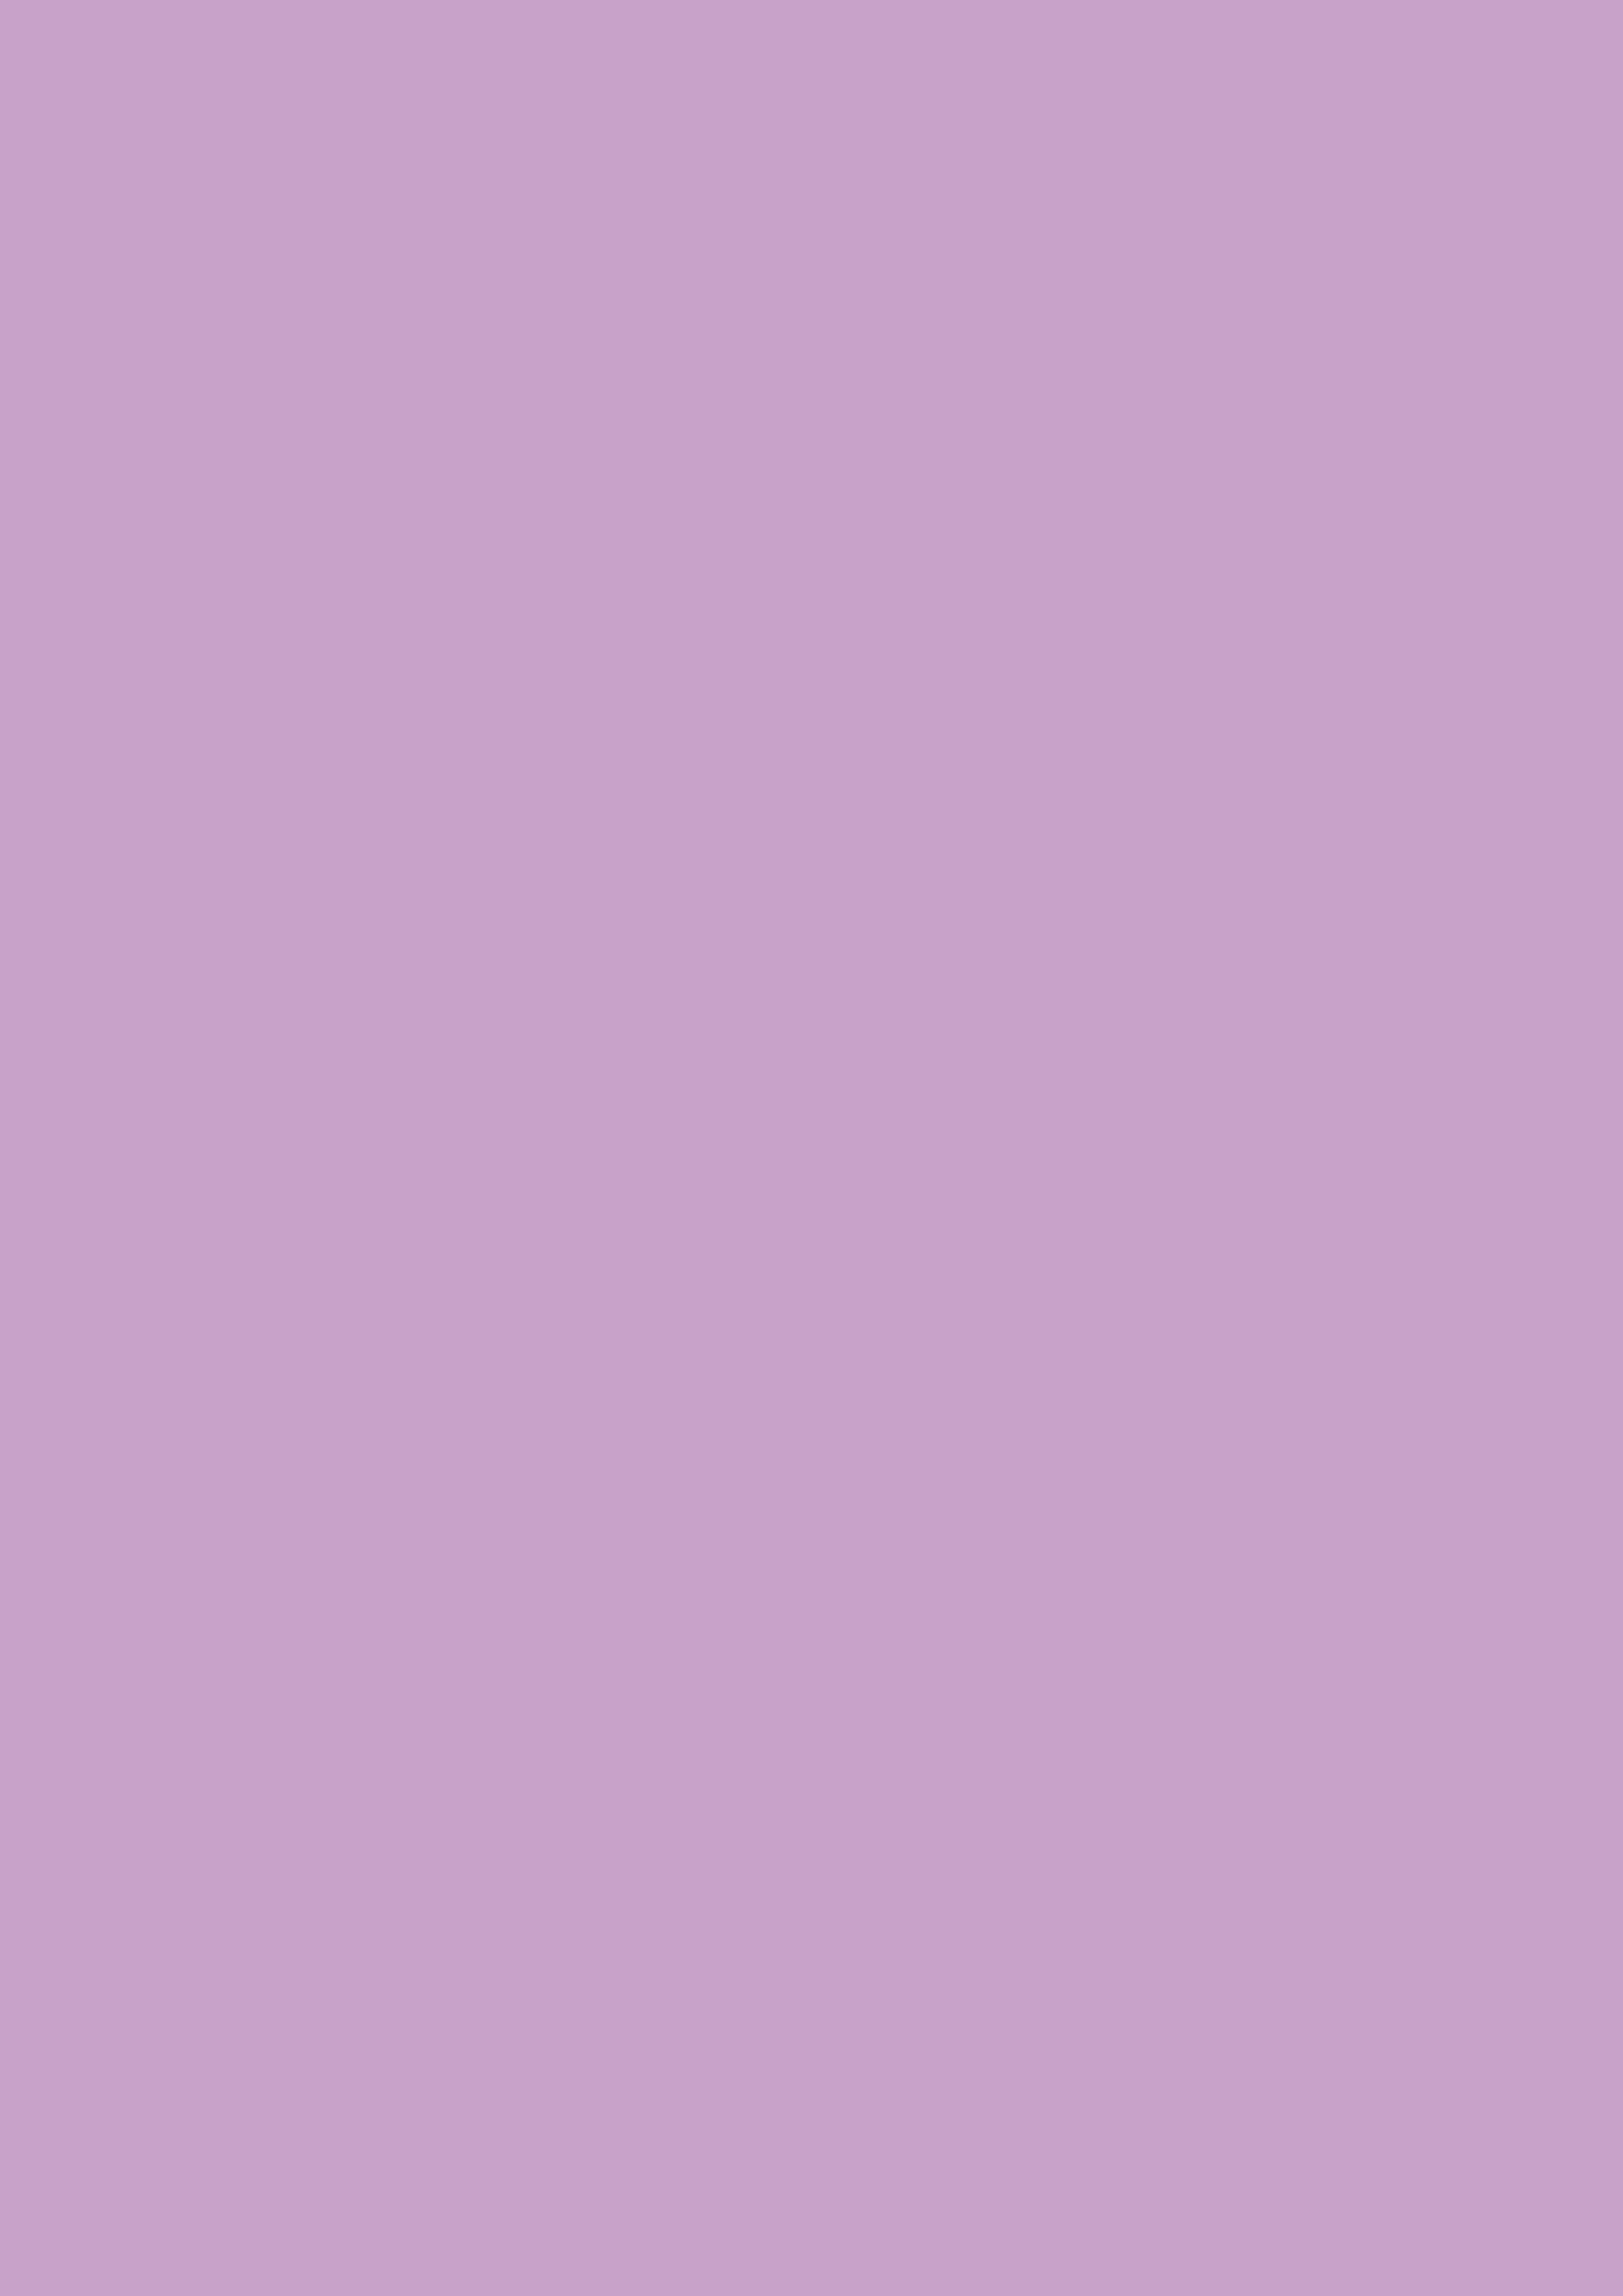 2480x3508 Lilac Solid Color Background